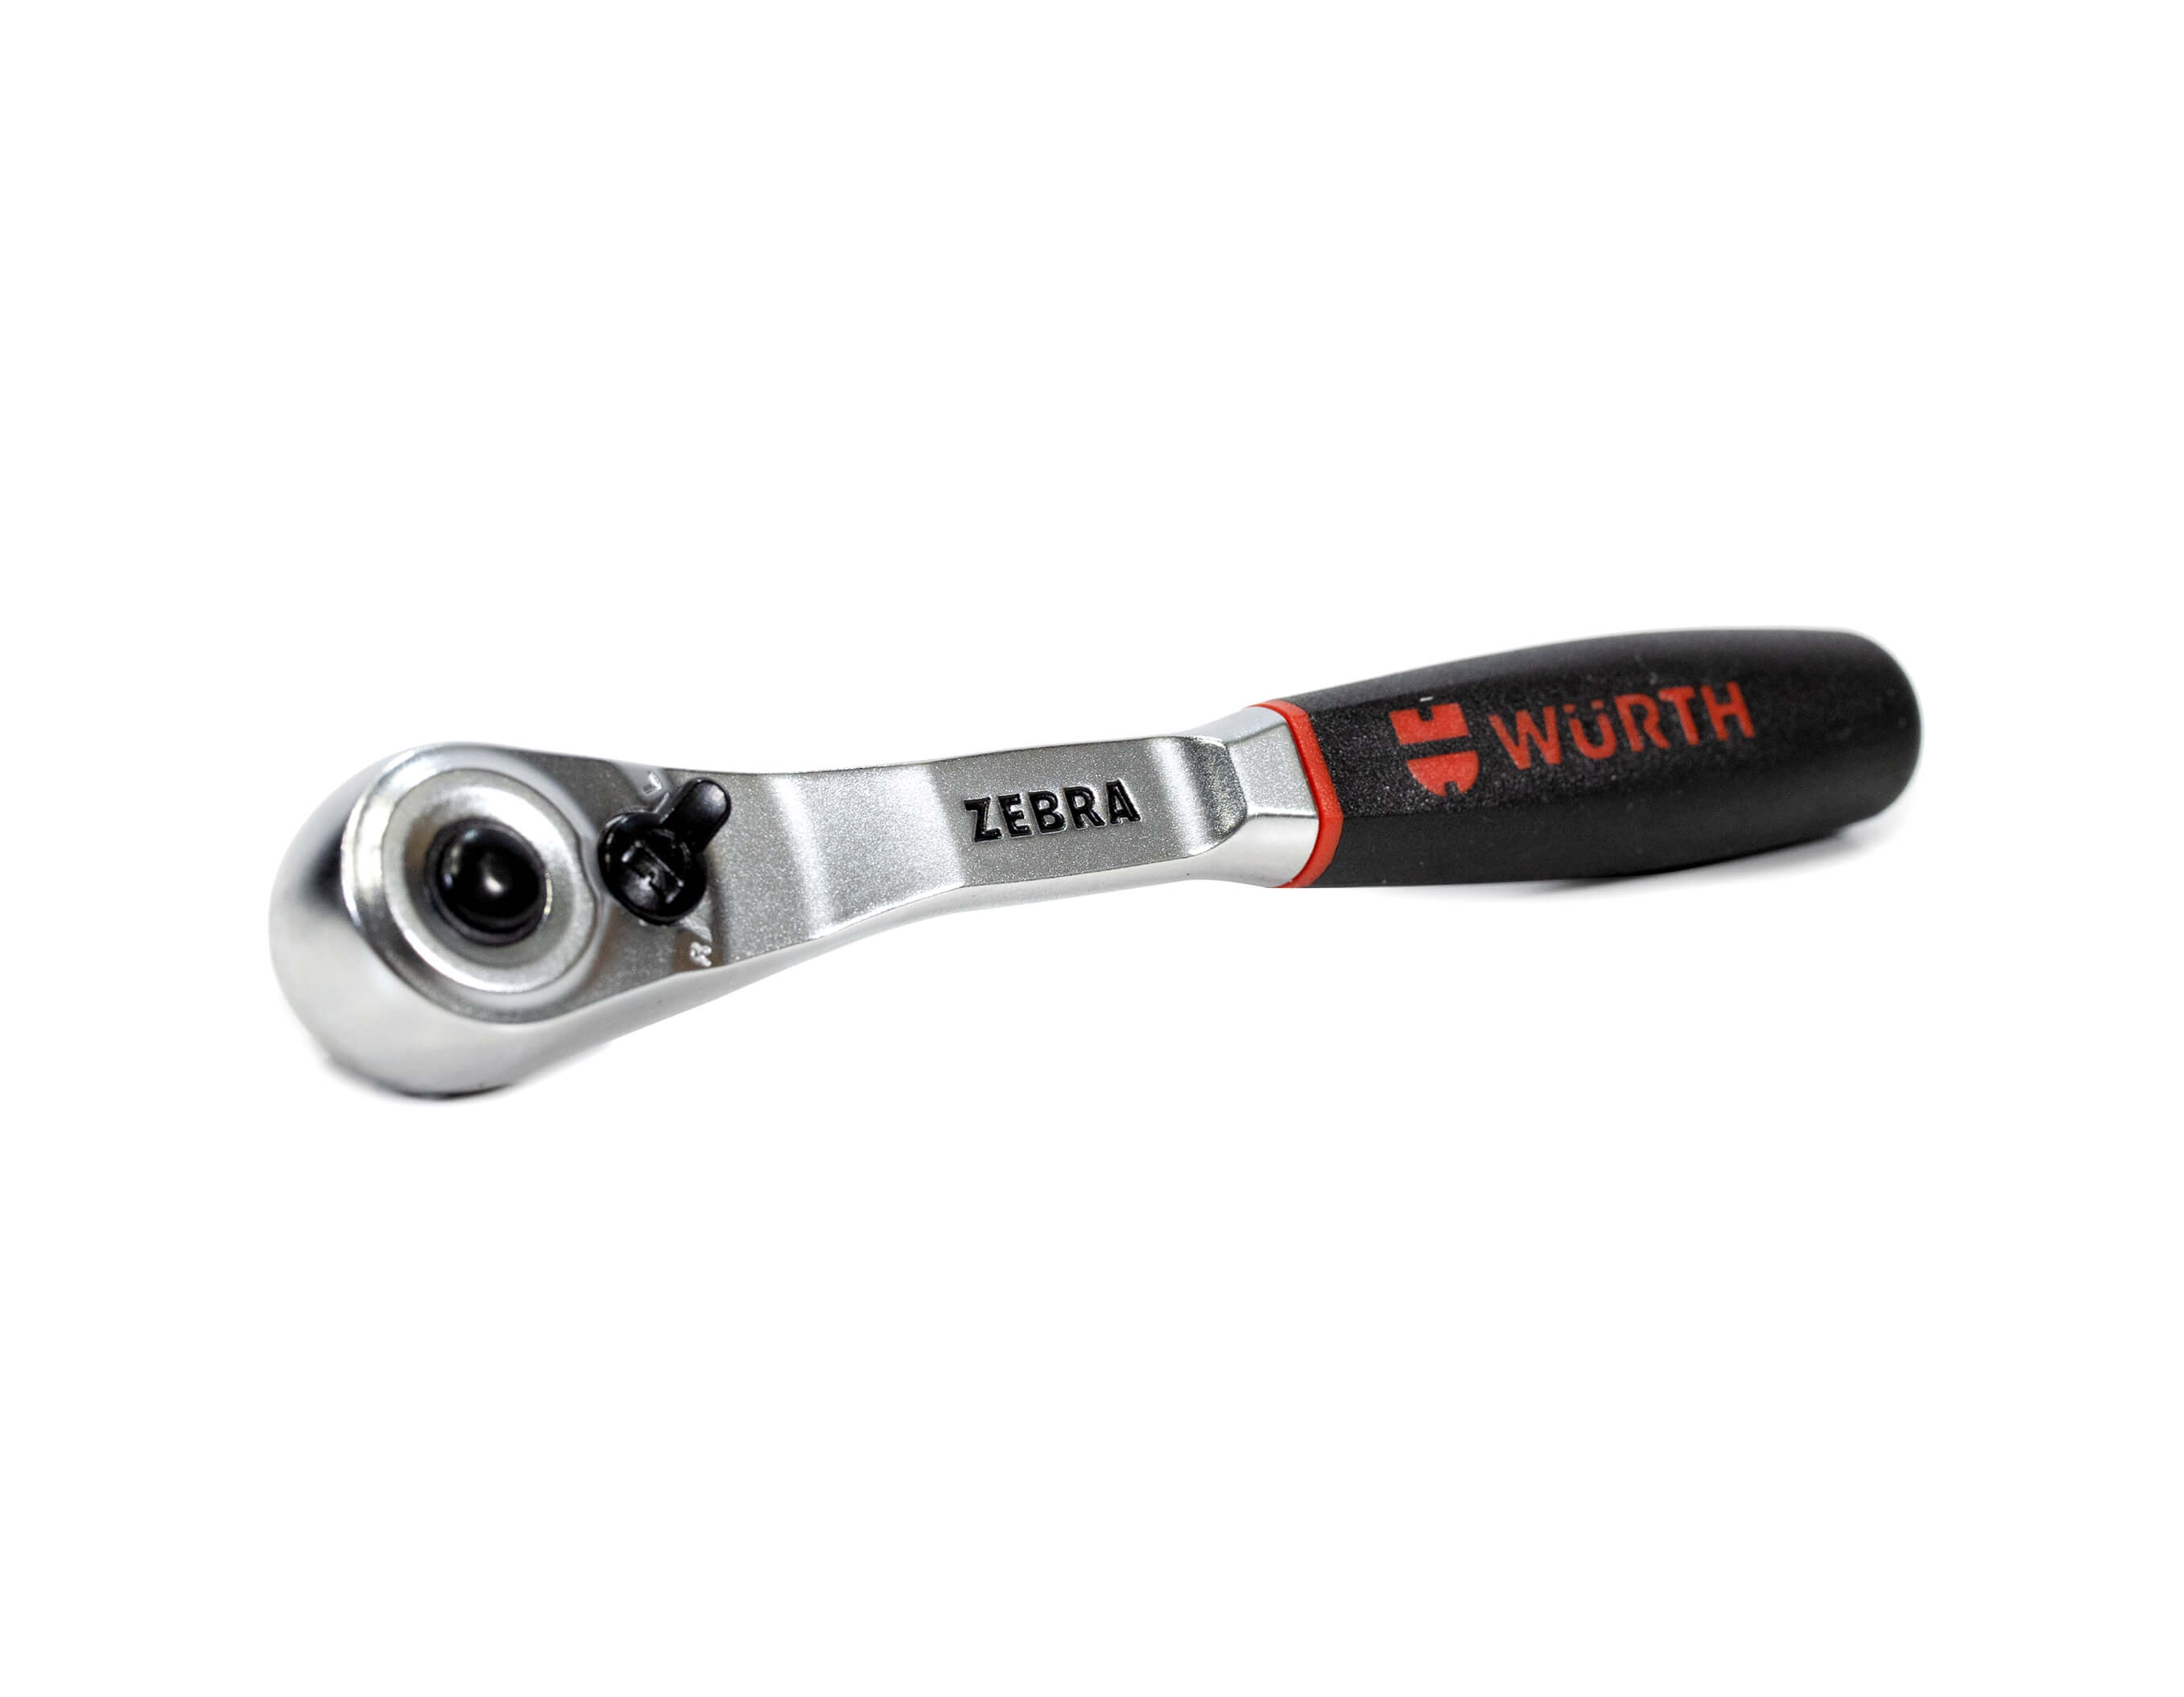 75th Edition Reversible Ratchet 1/4 Inch